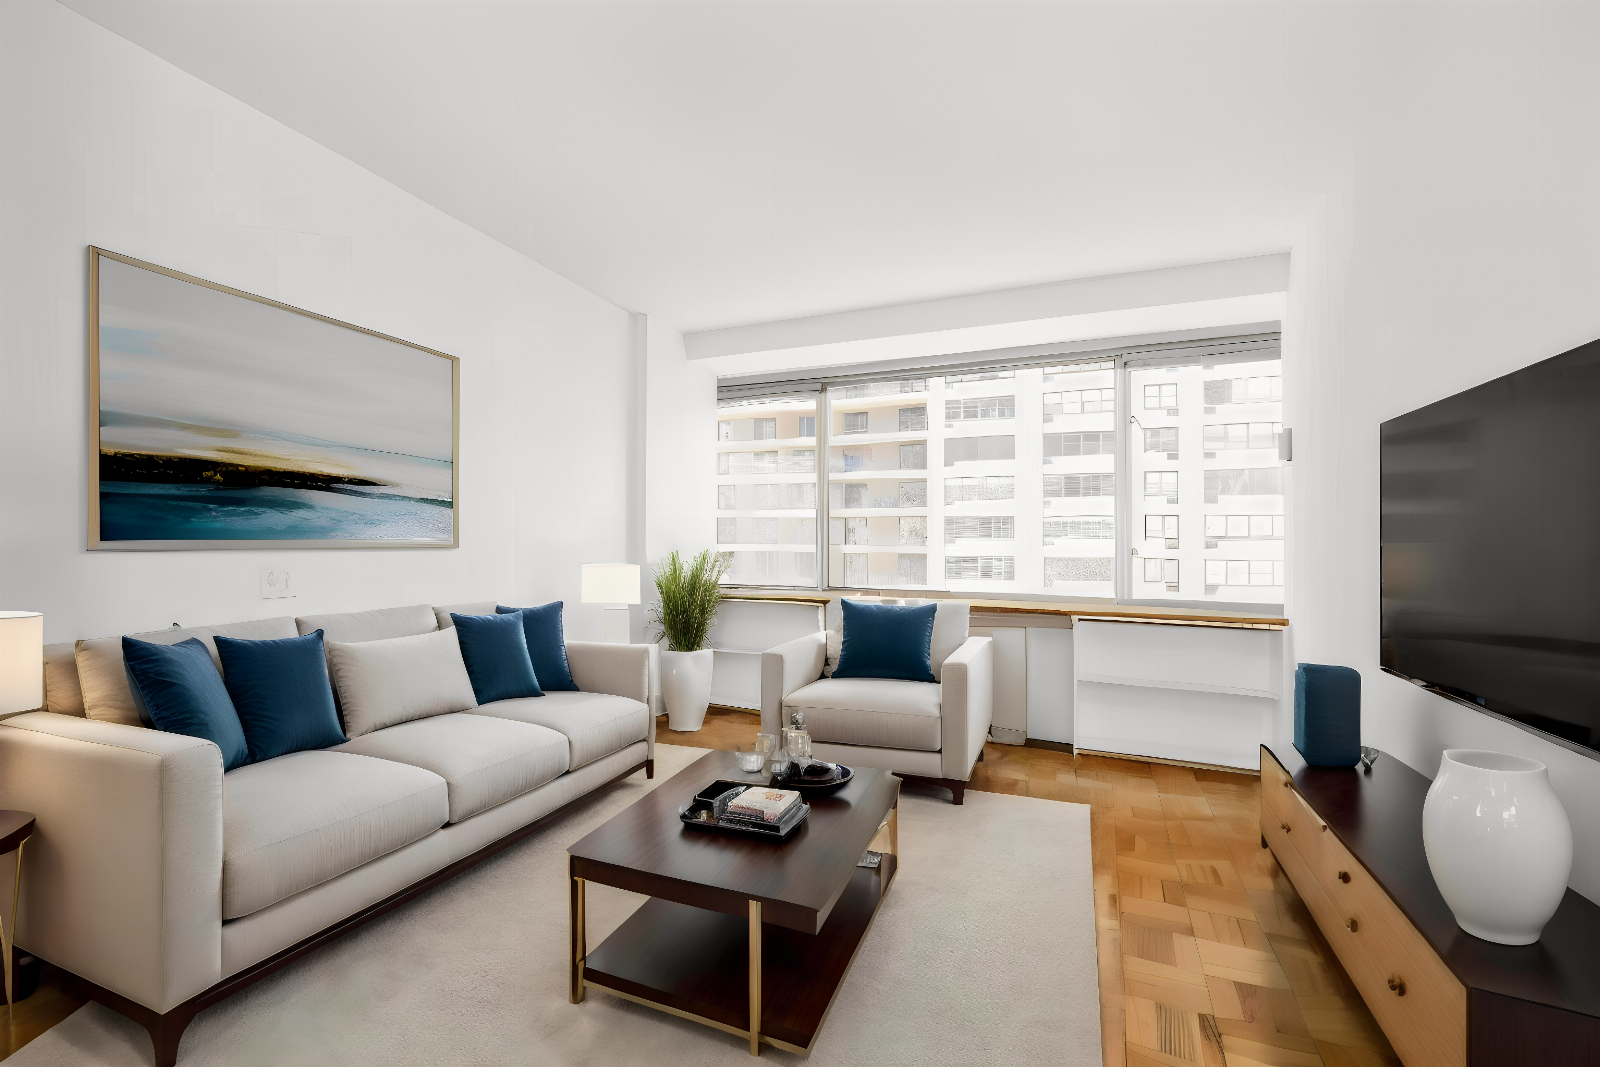 Virtual Staging AI helps Realtors digitally furnish rooms within seconds